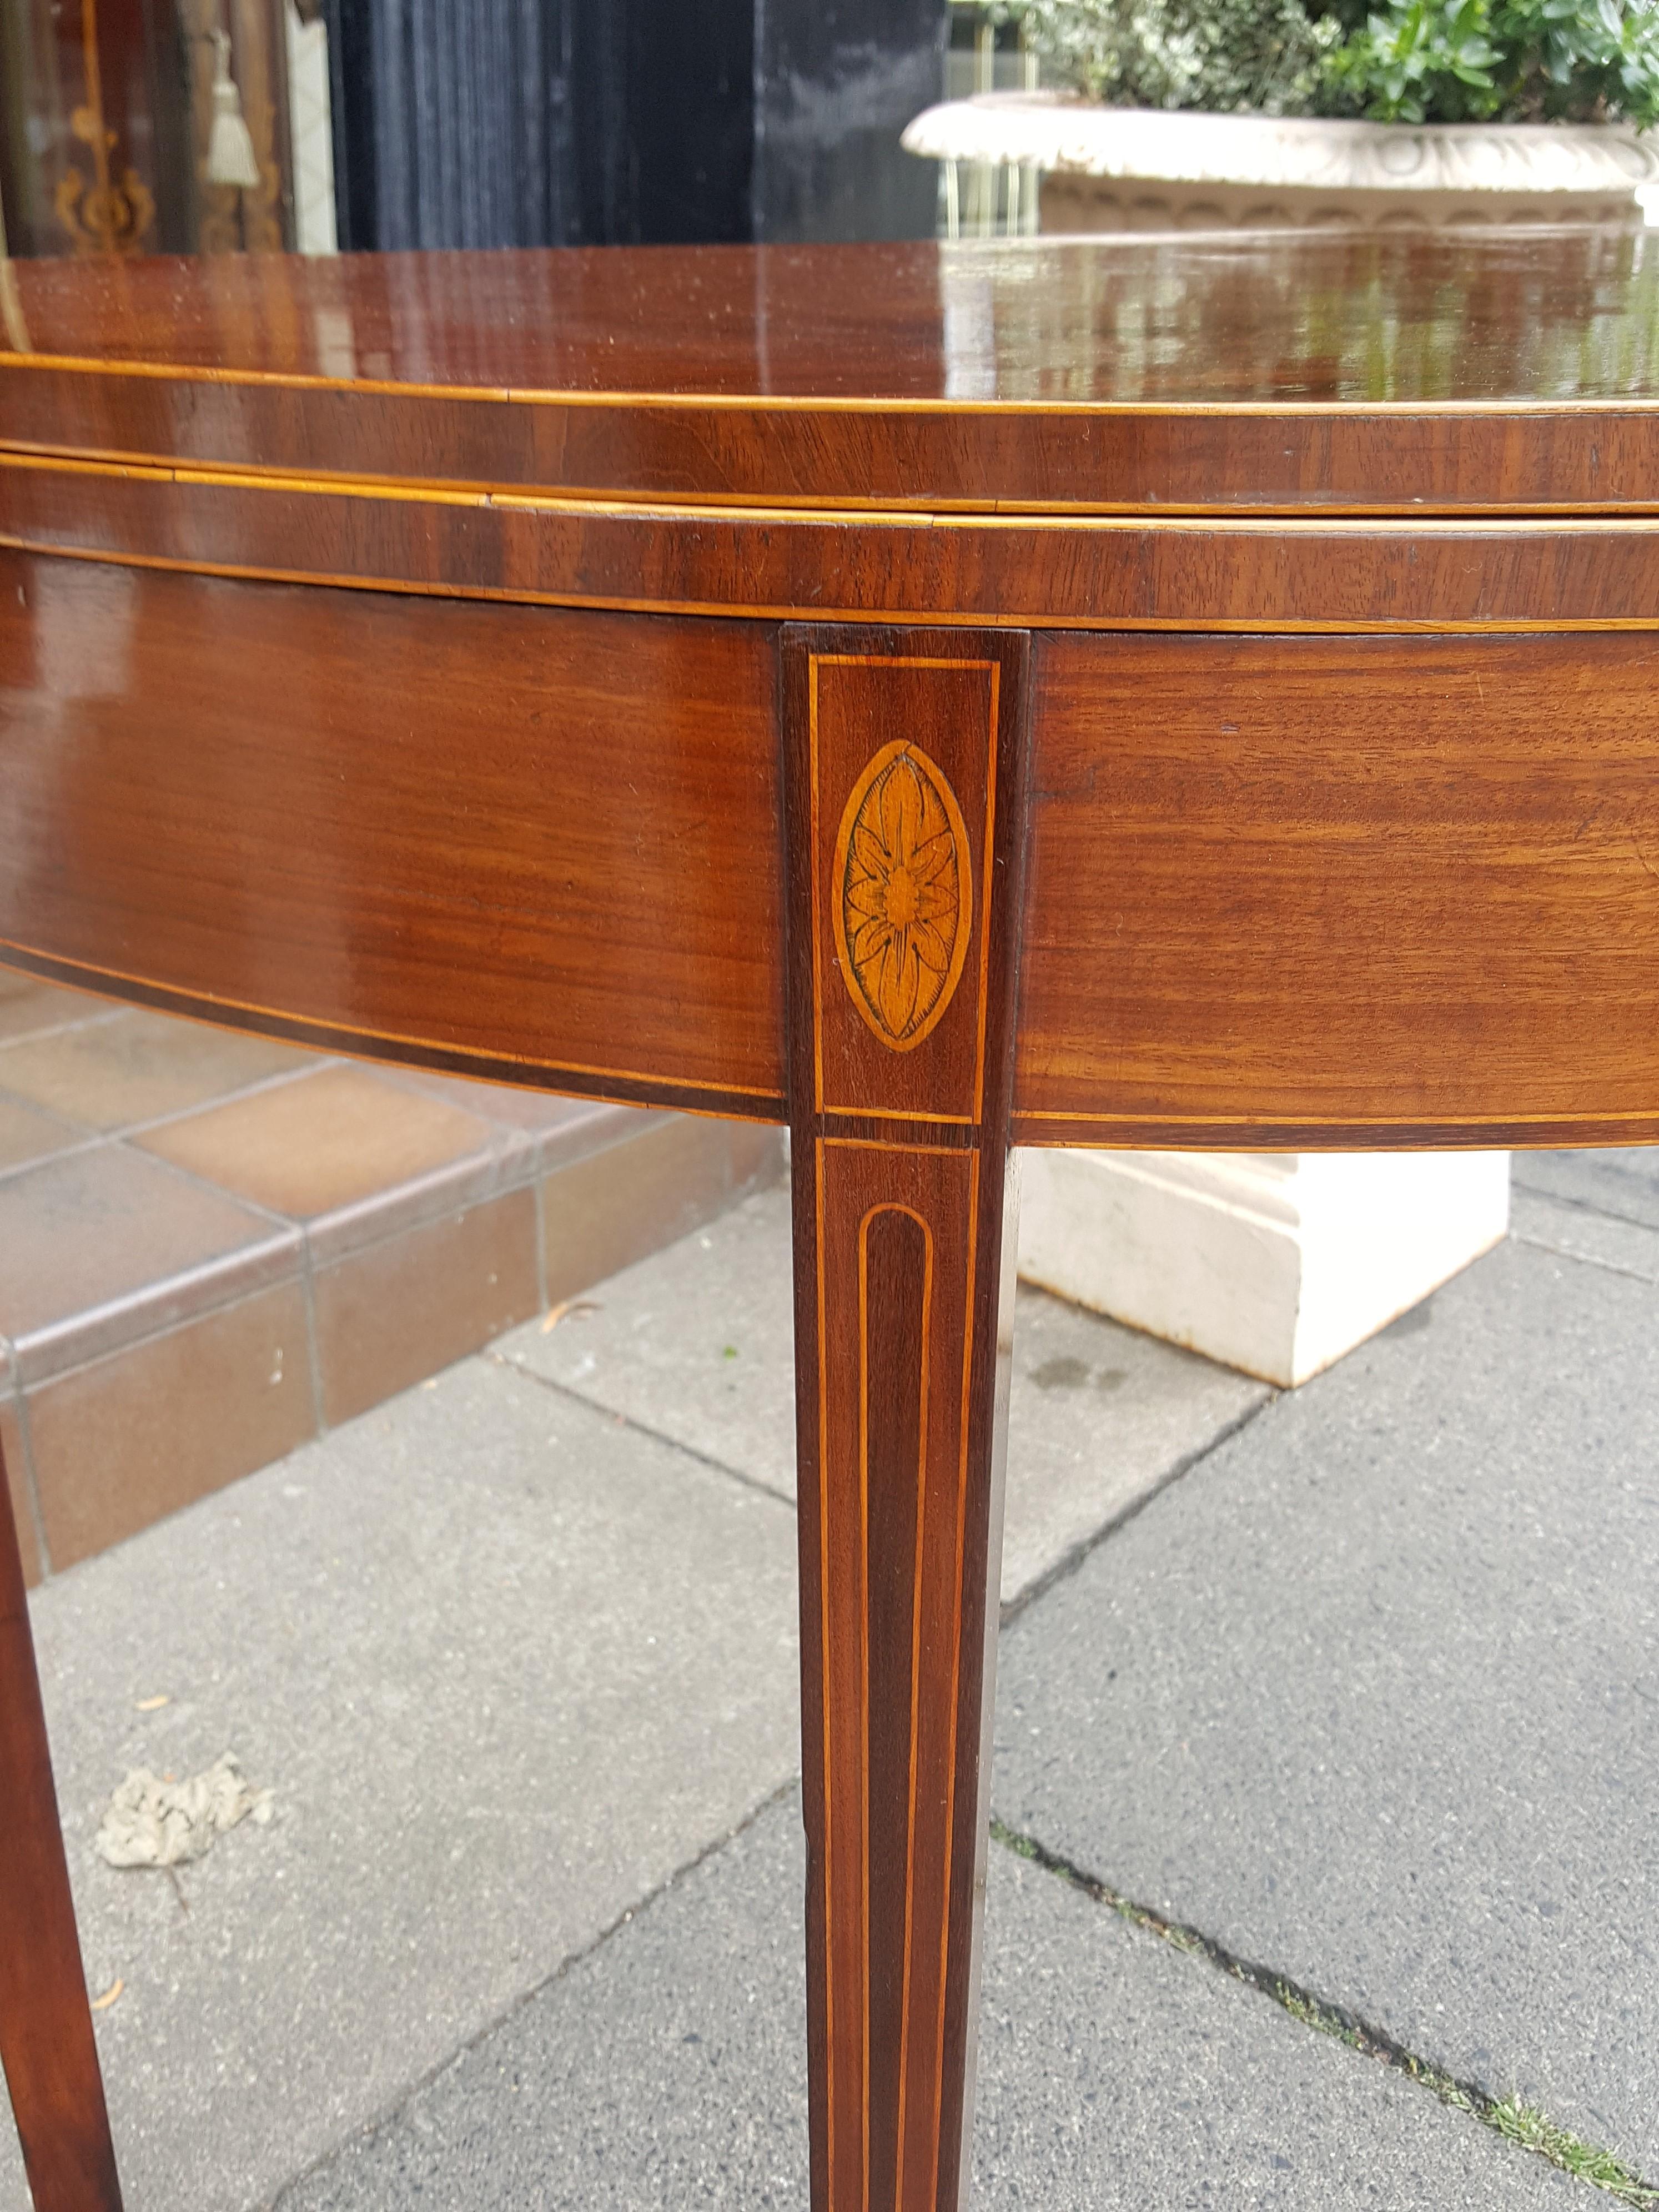 Sheraton period Mahogany demilune tea table with square tapered inlaid leg and double gate action.
Measures: 35